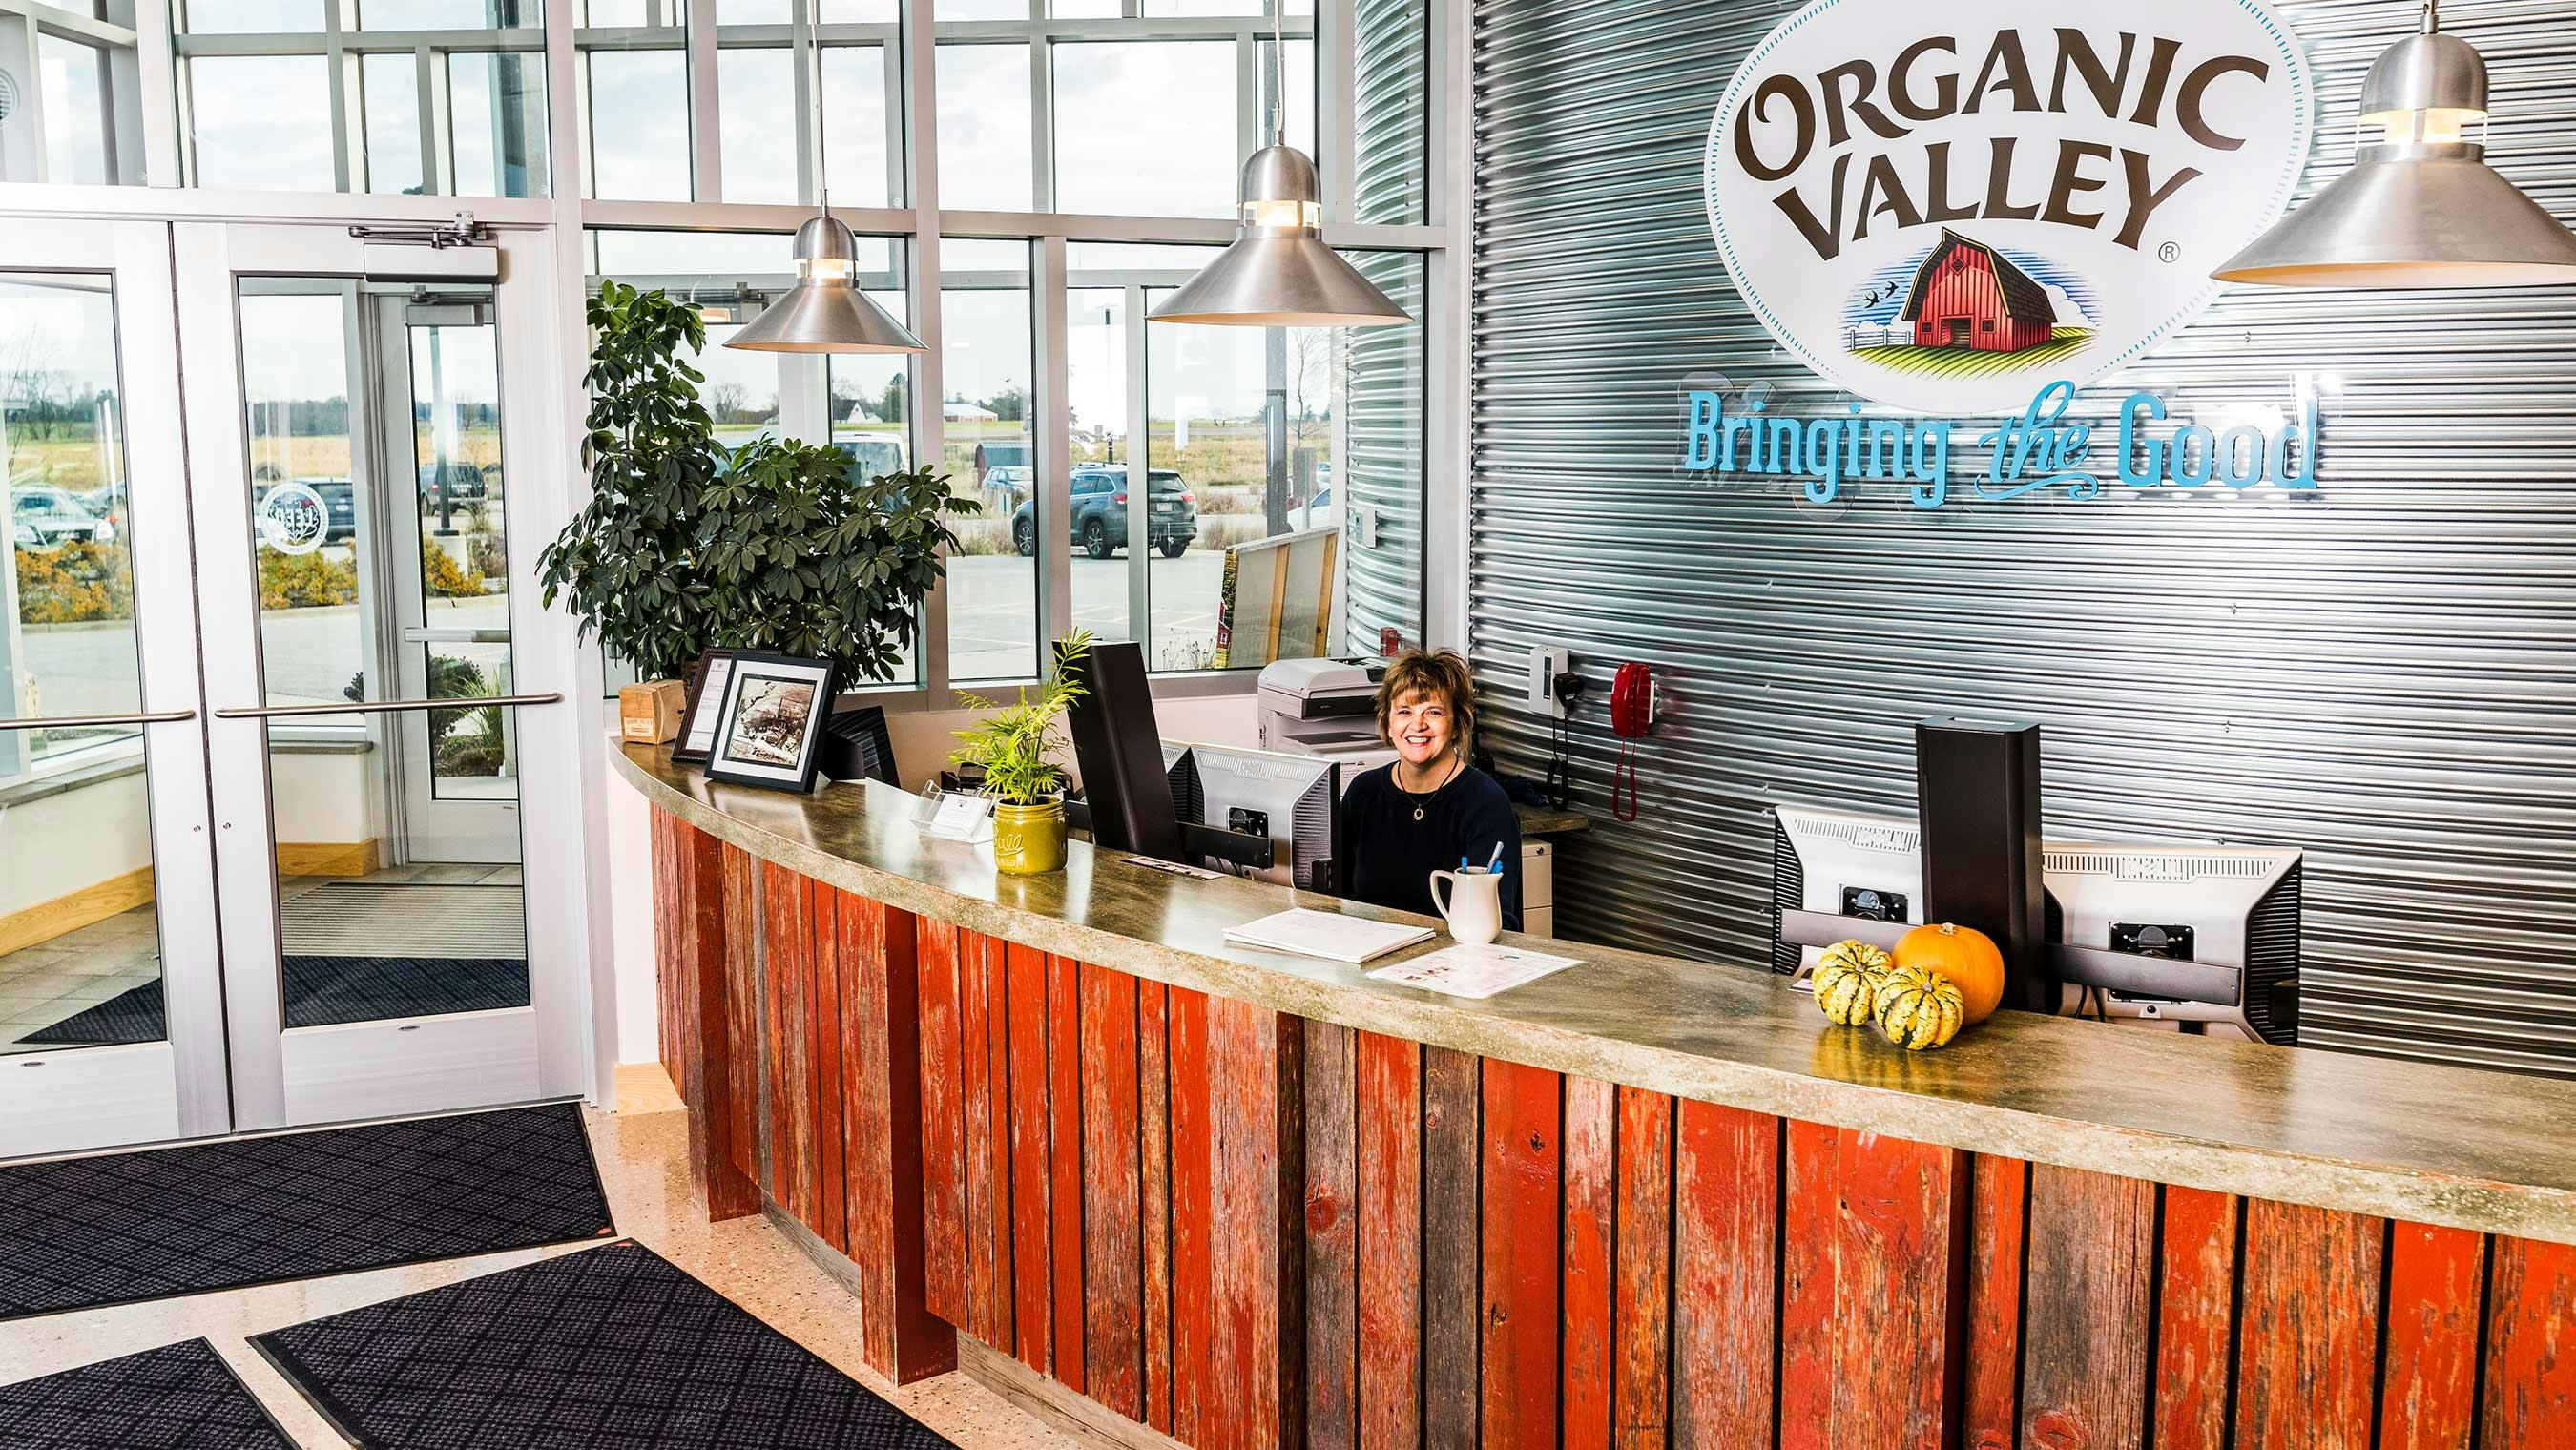 A woman at the front desk of Organic Valley's office building.